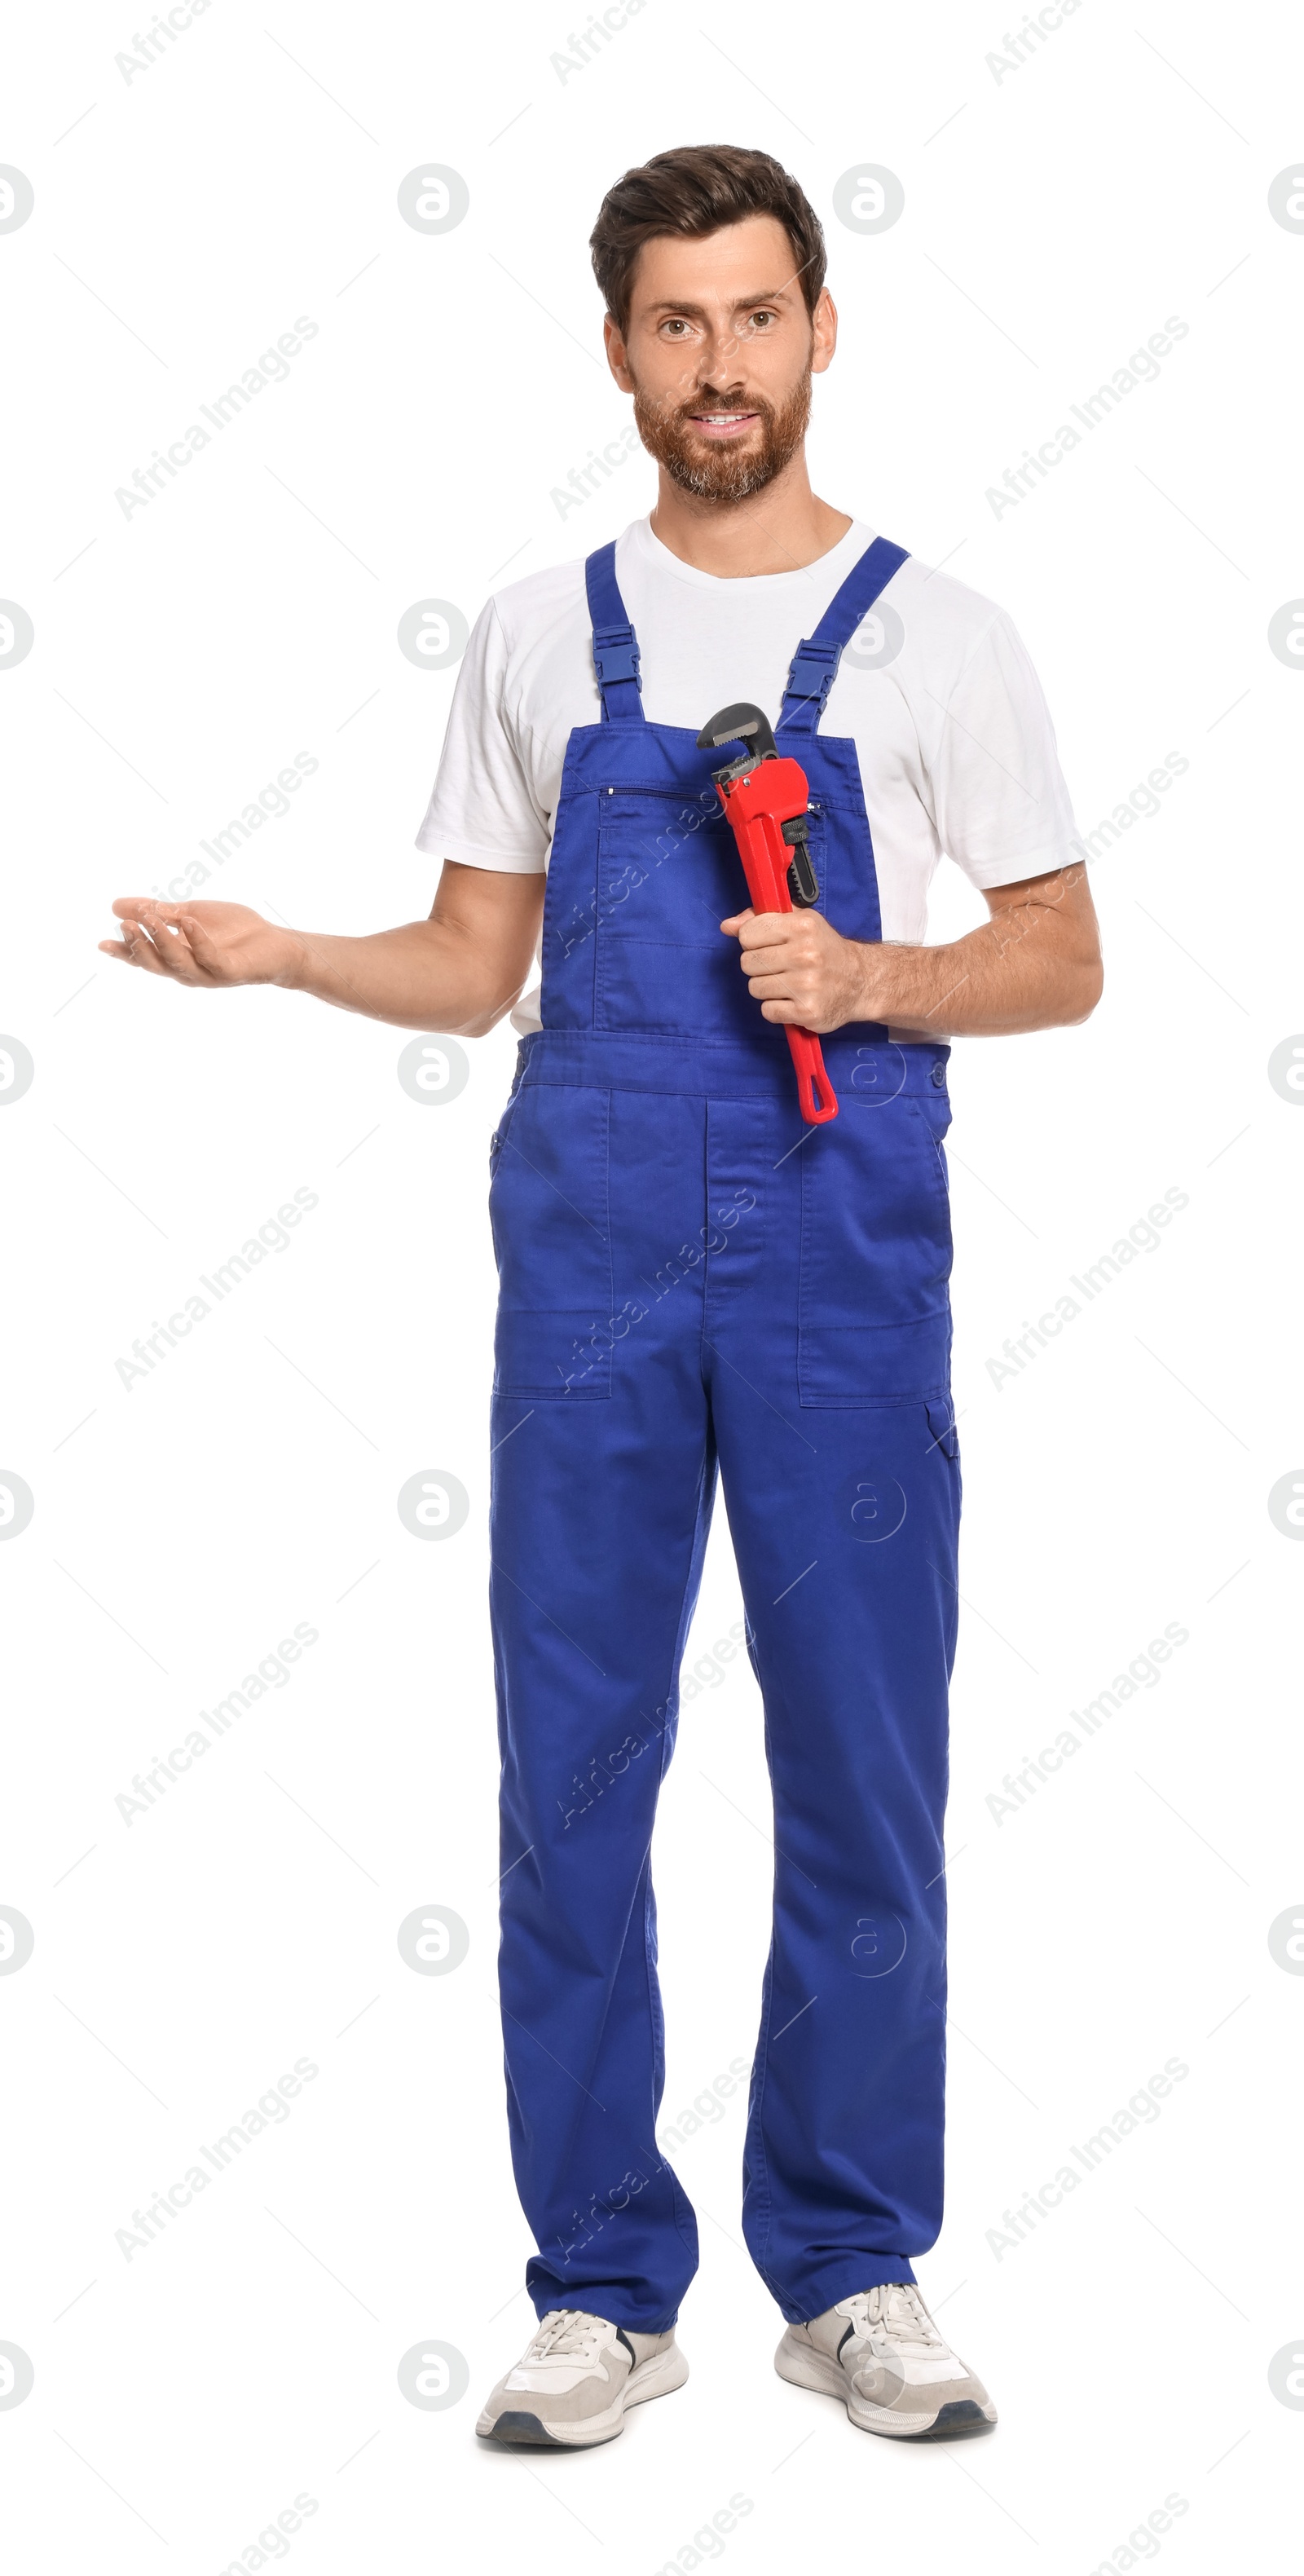 Photo of Professional plumber with pipe wrench on white background